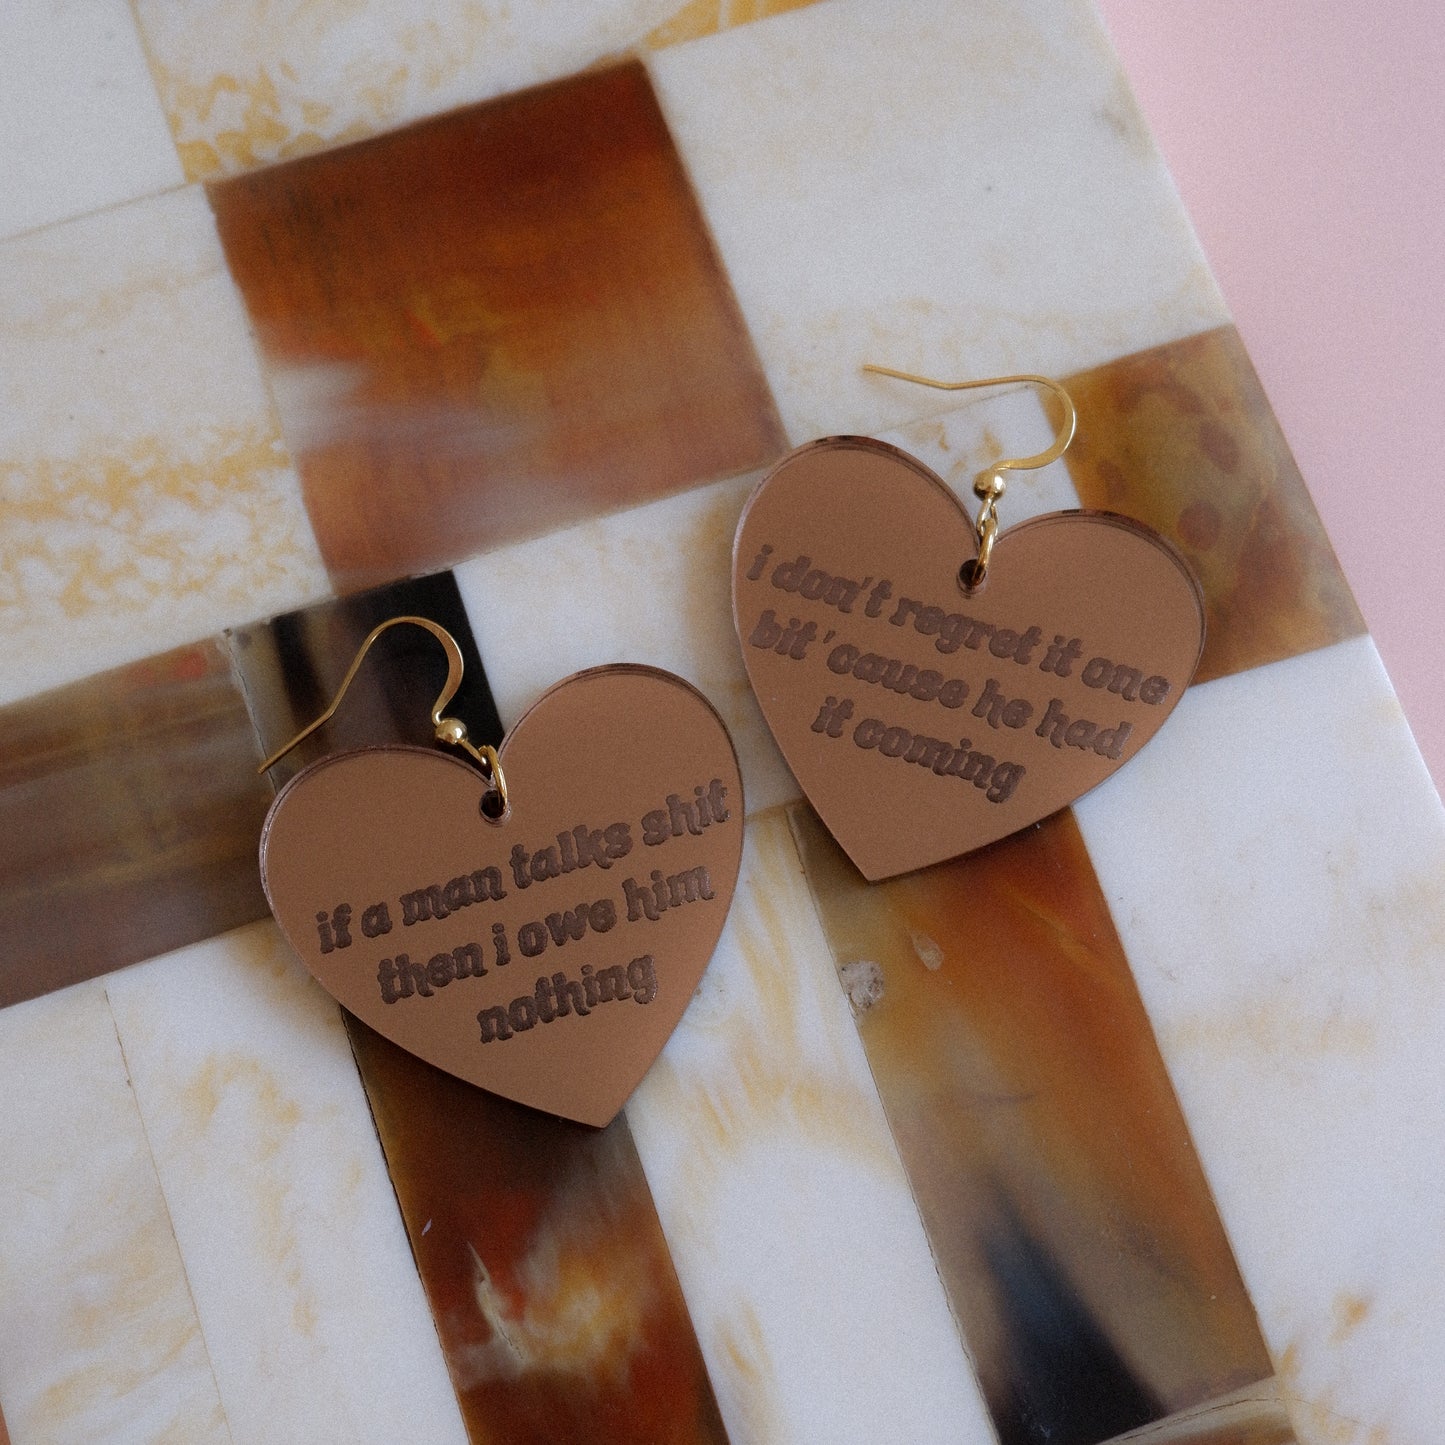 'i did something bad' hearts - taylor swift earrings